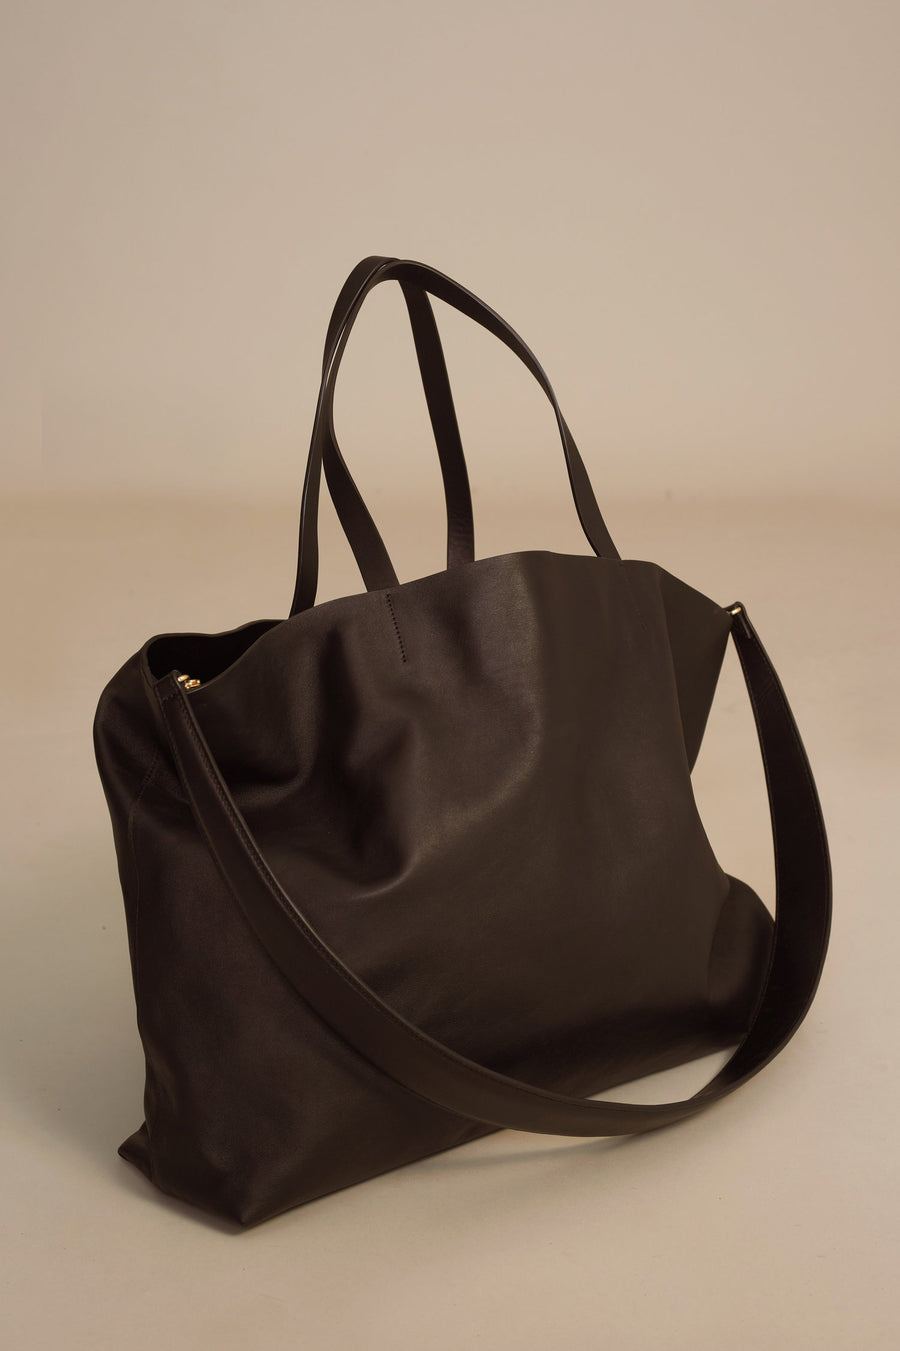 XL Leather Weekender in Chocolate